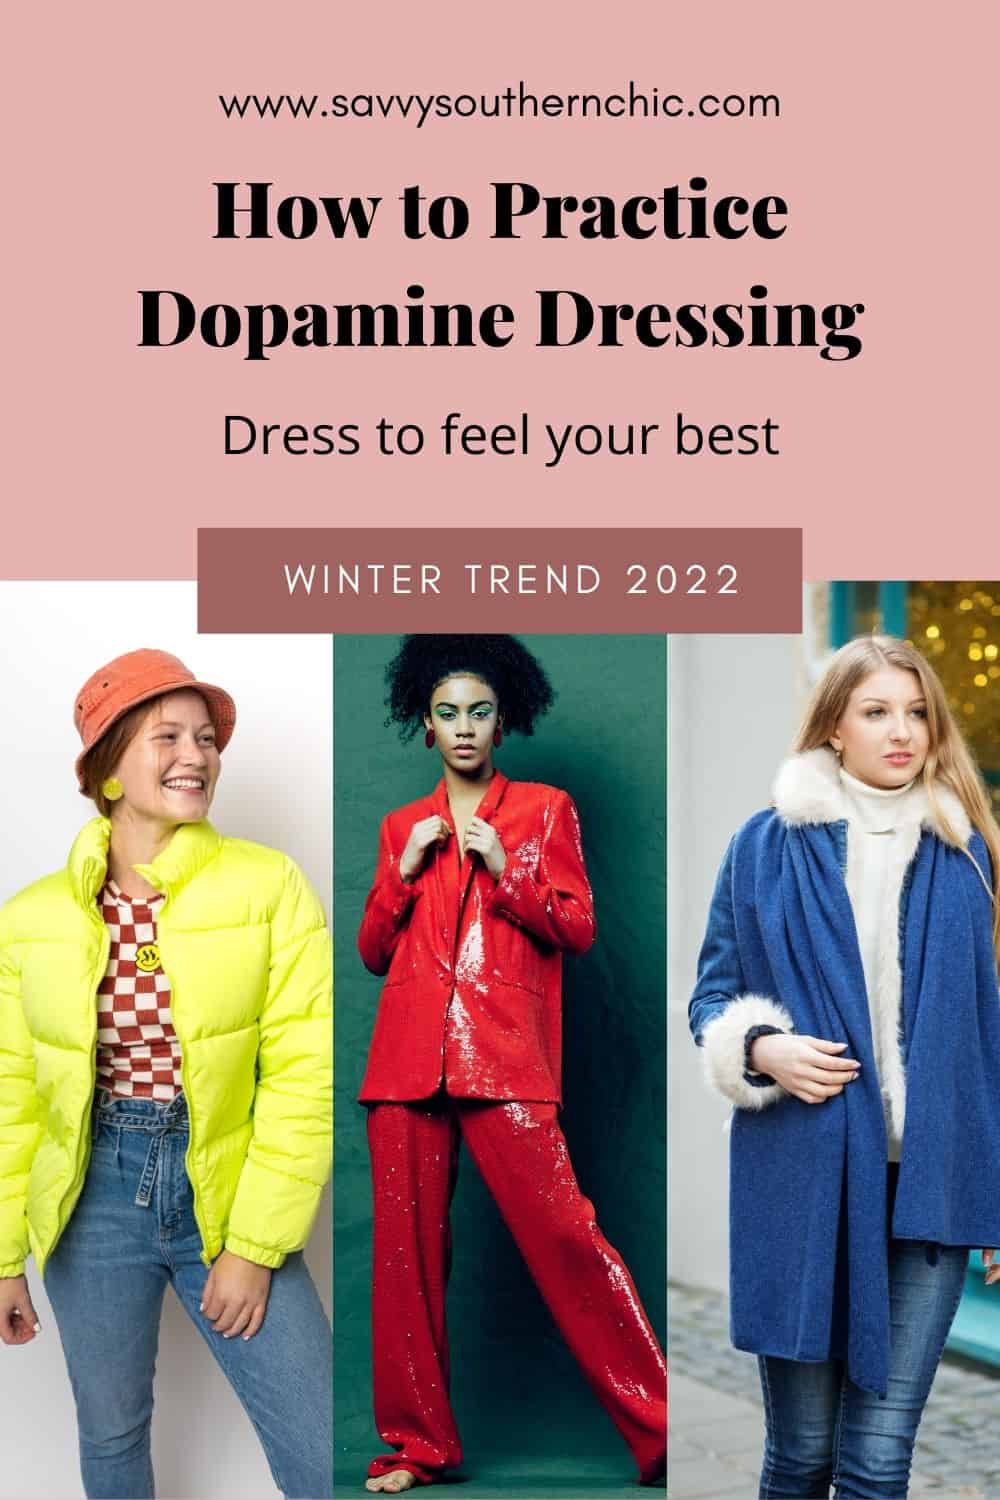 dopamine dressing in bright colors